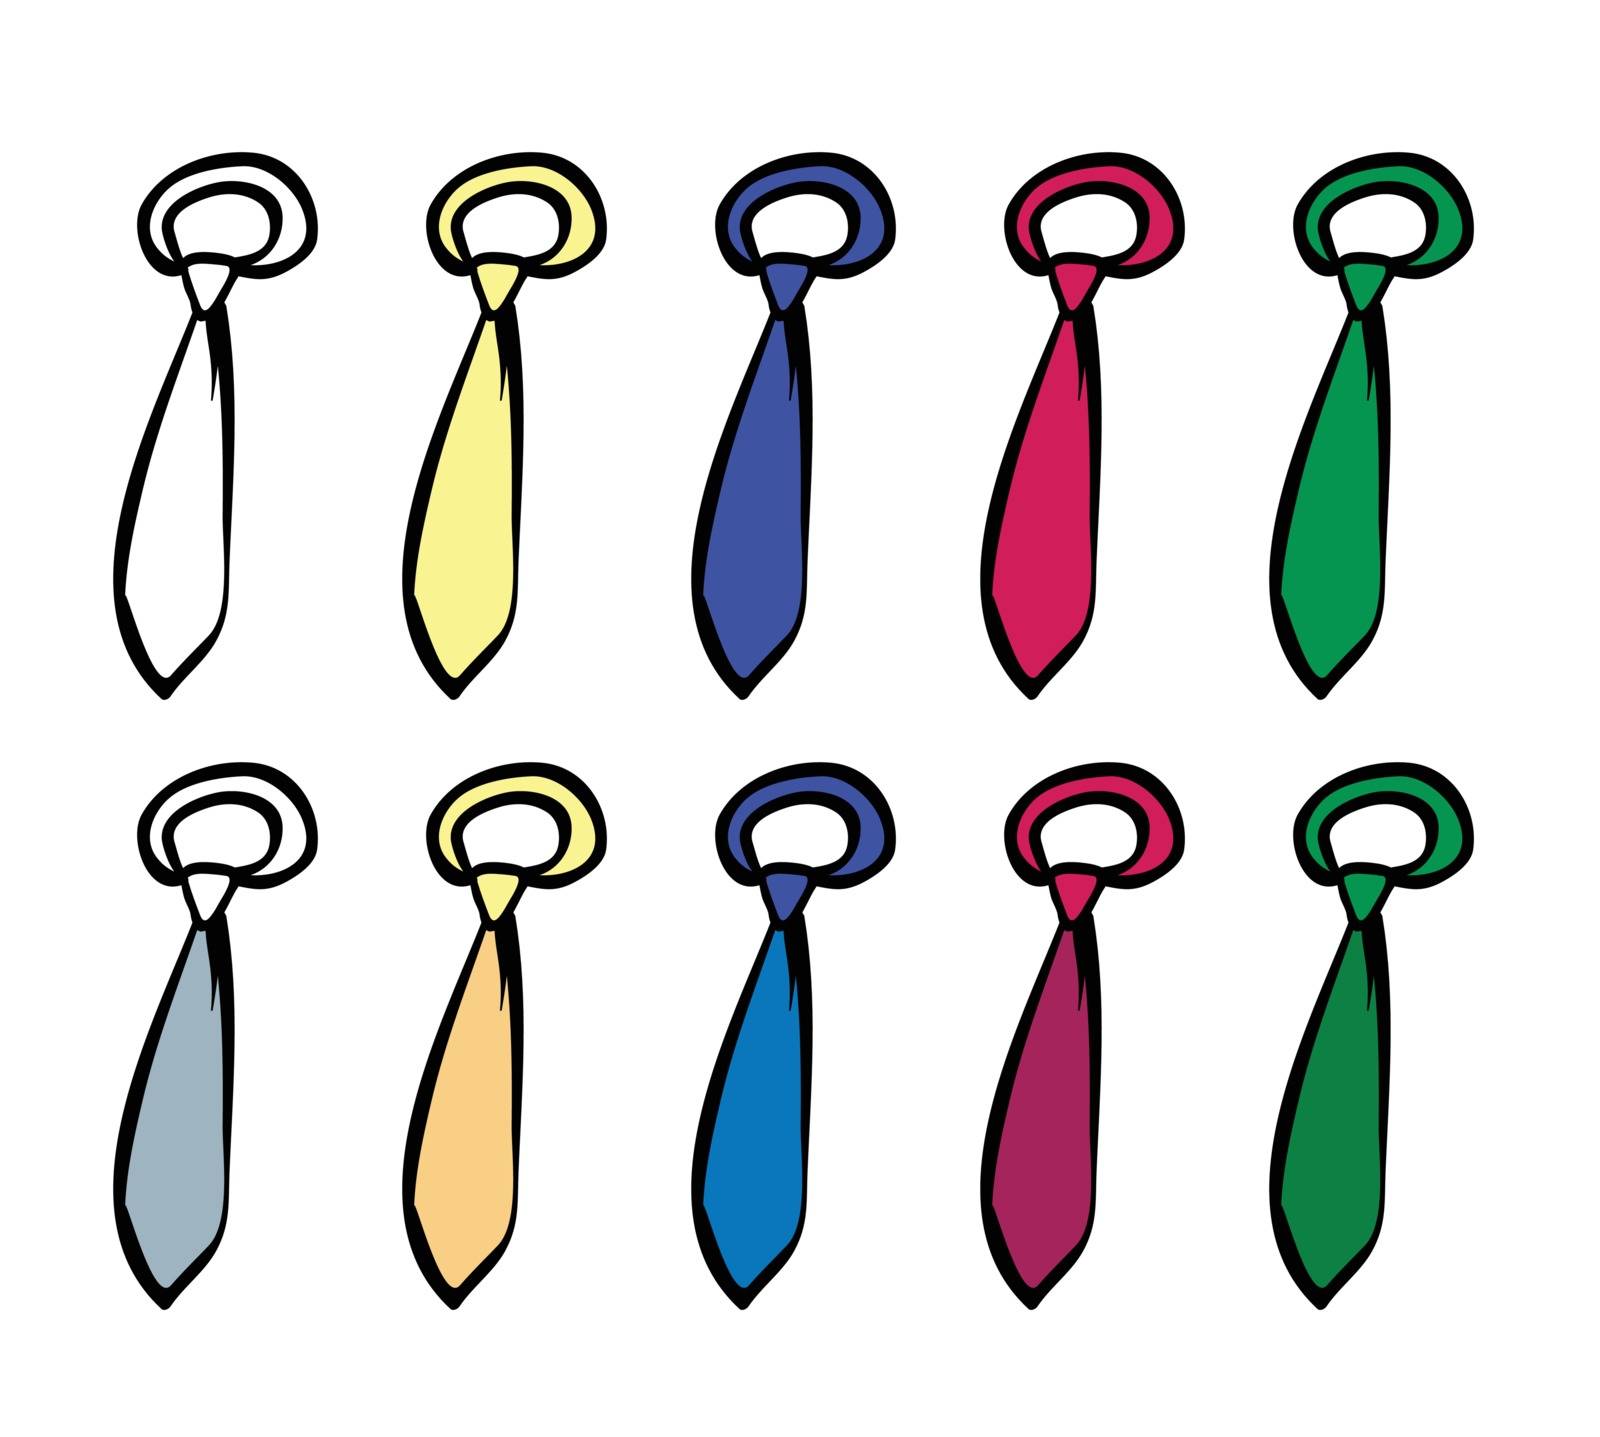 Ties in different colors by iimages